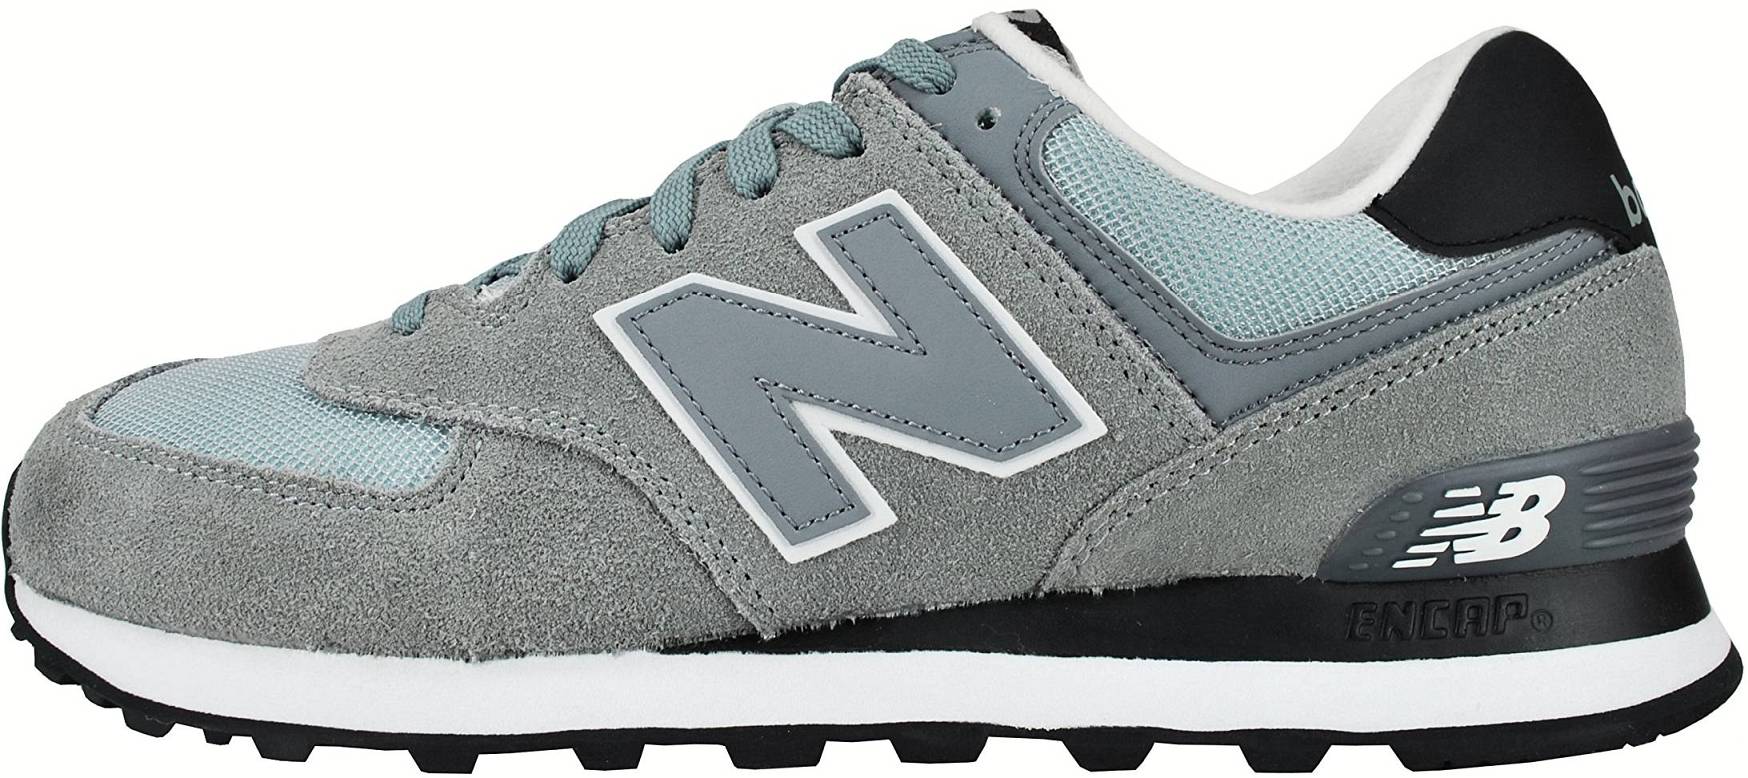 New Balance 574 Core Plus – Shoes Reviews & Reasons To Buy